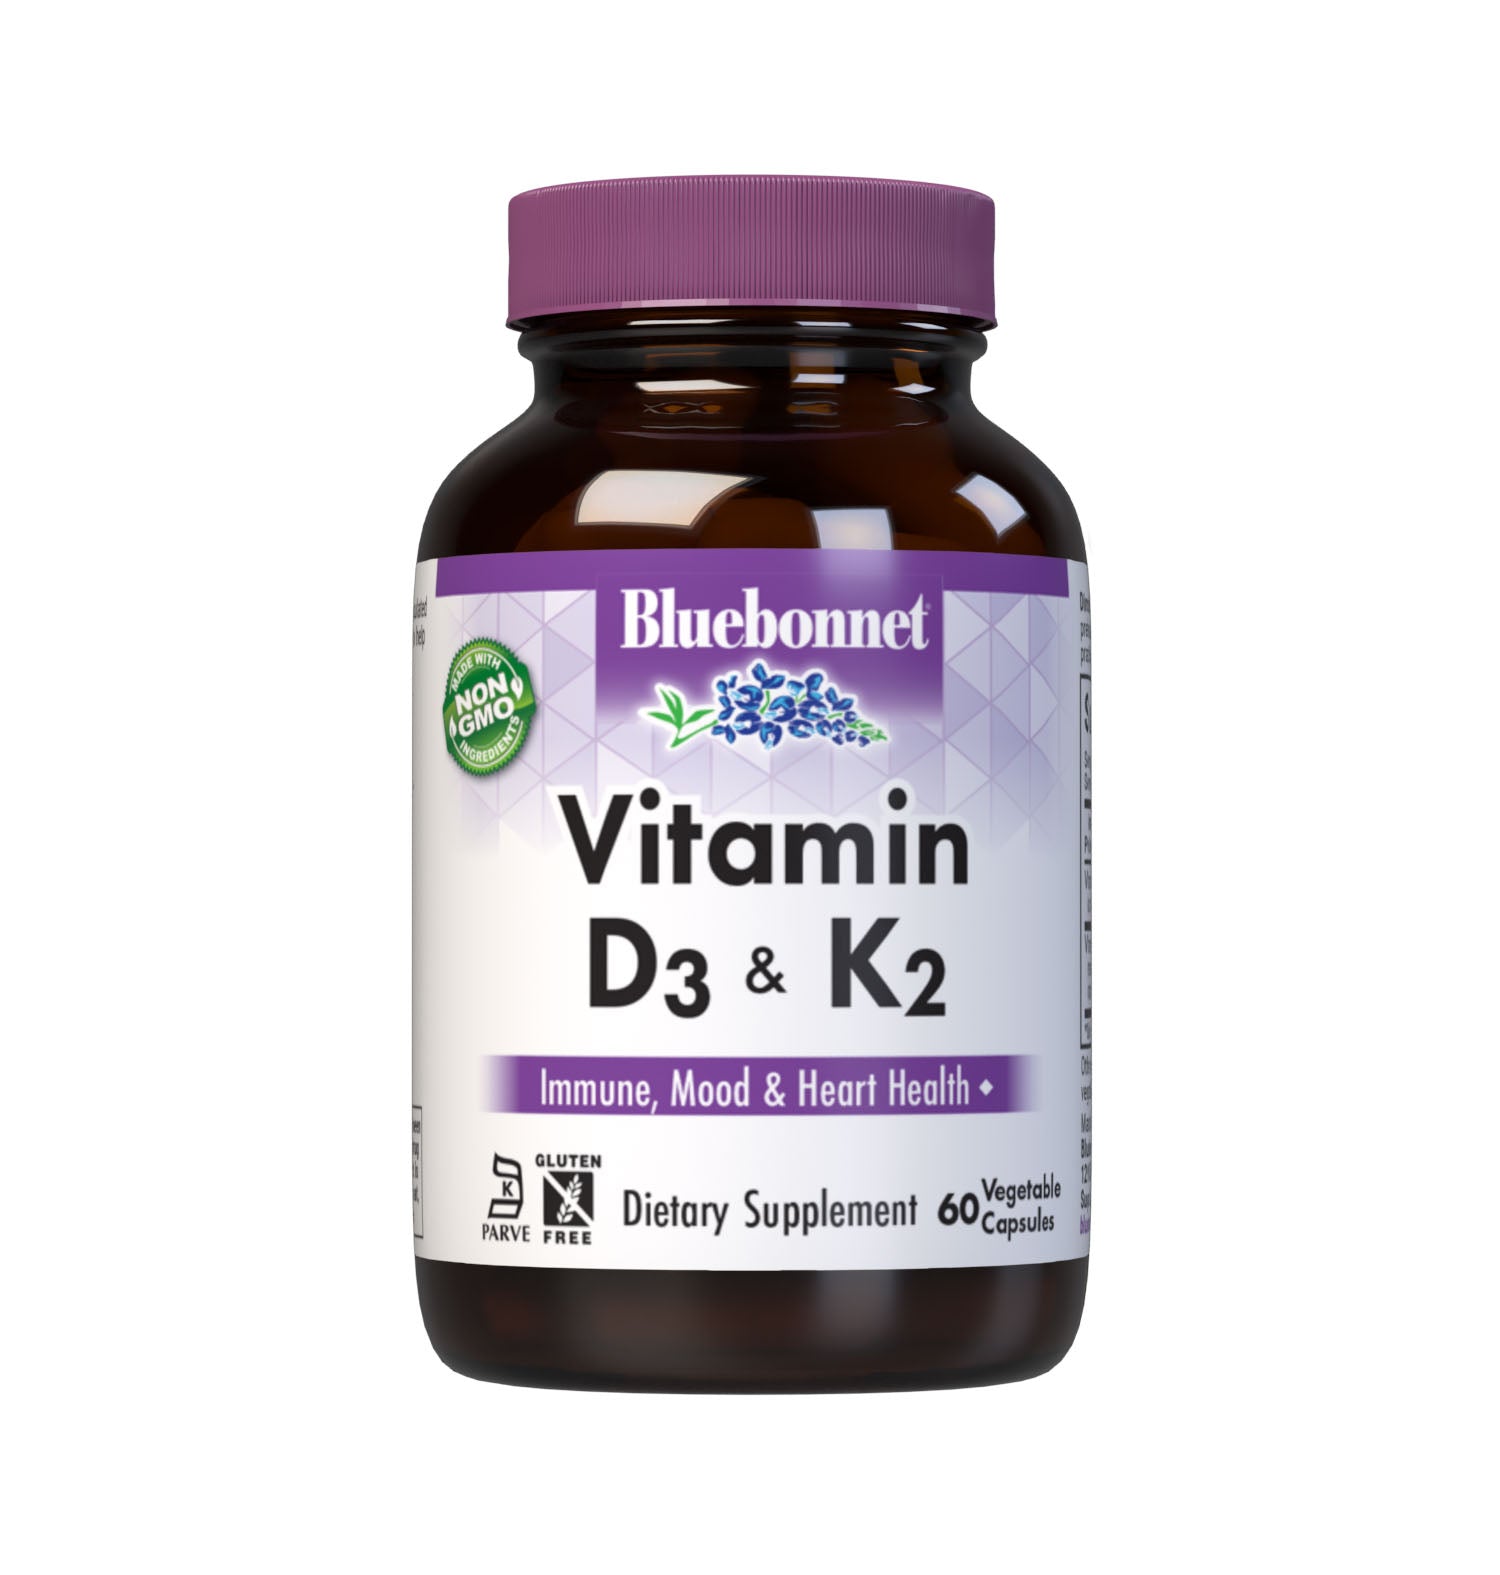 Bluebonnet’s Vitamin D3 & K2 60 Vegetable Capsules are formulated with vitamin D3 (cholecalciferol) and vitamin K2 (MK-7) from Natto. #size_60 count